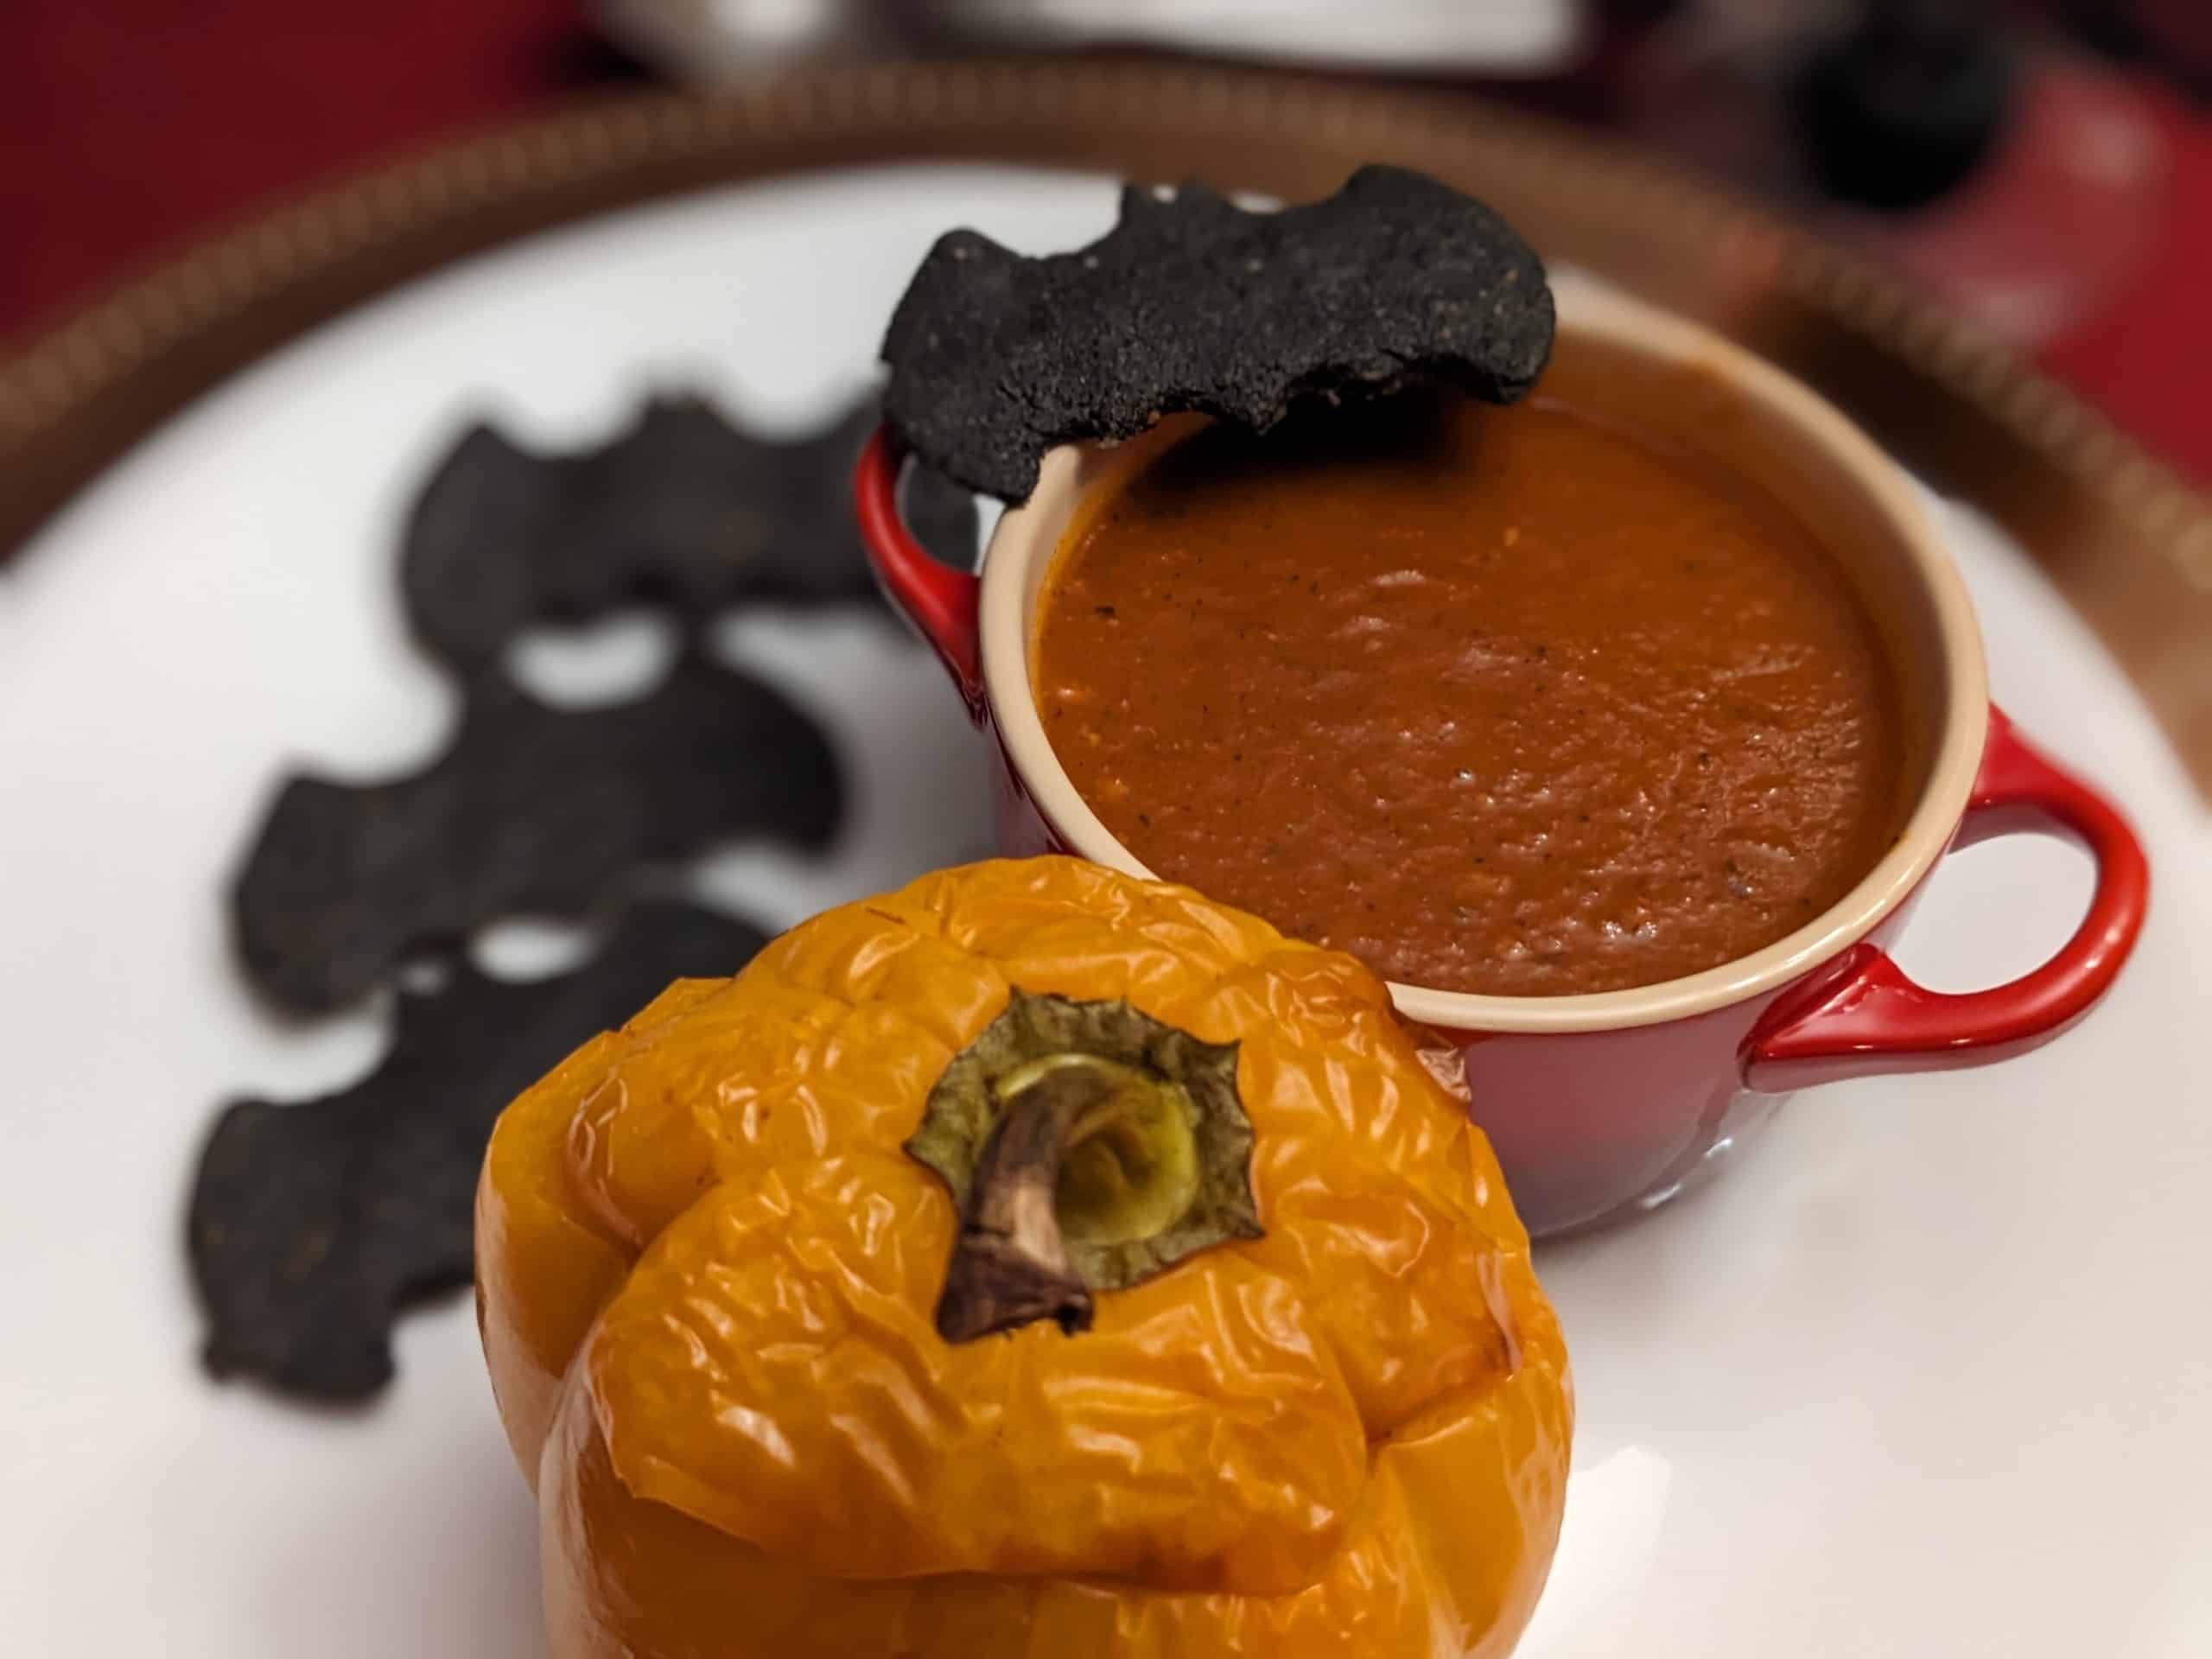 Plated bowl of Roasted Tomato Poblano Soup with Keto Black Bat Crackers and a Stuffed Pepper Jack-O-Lantern